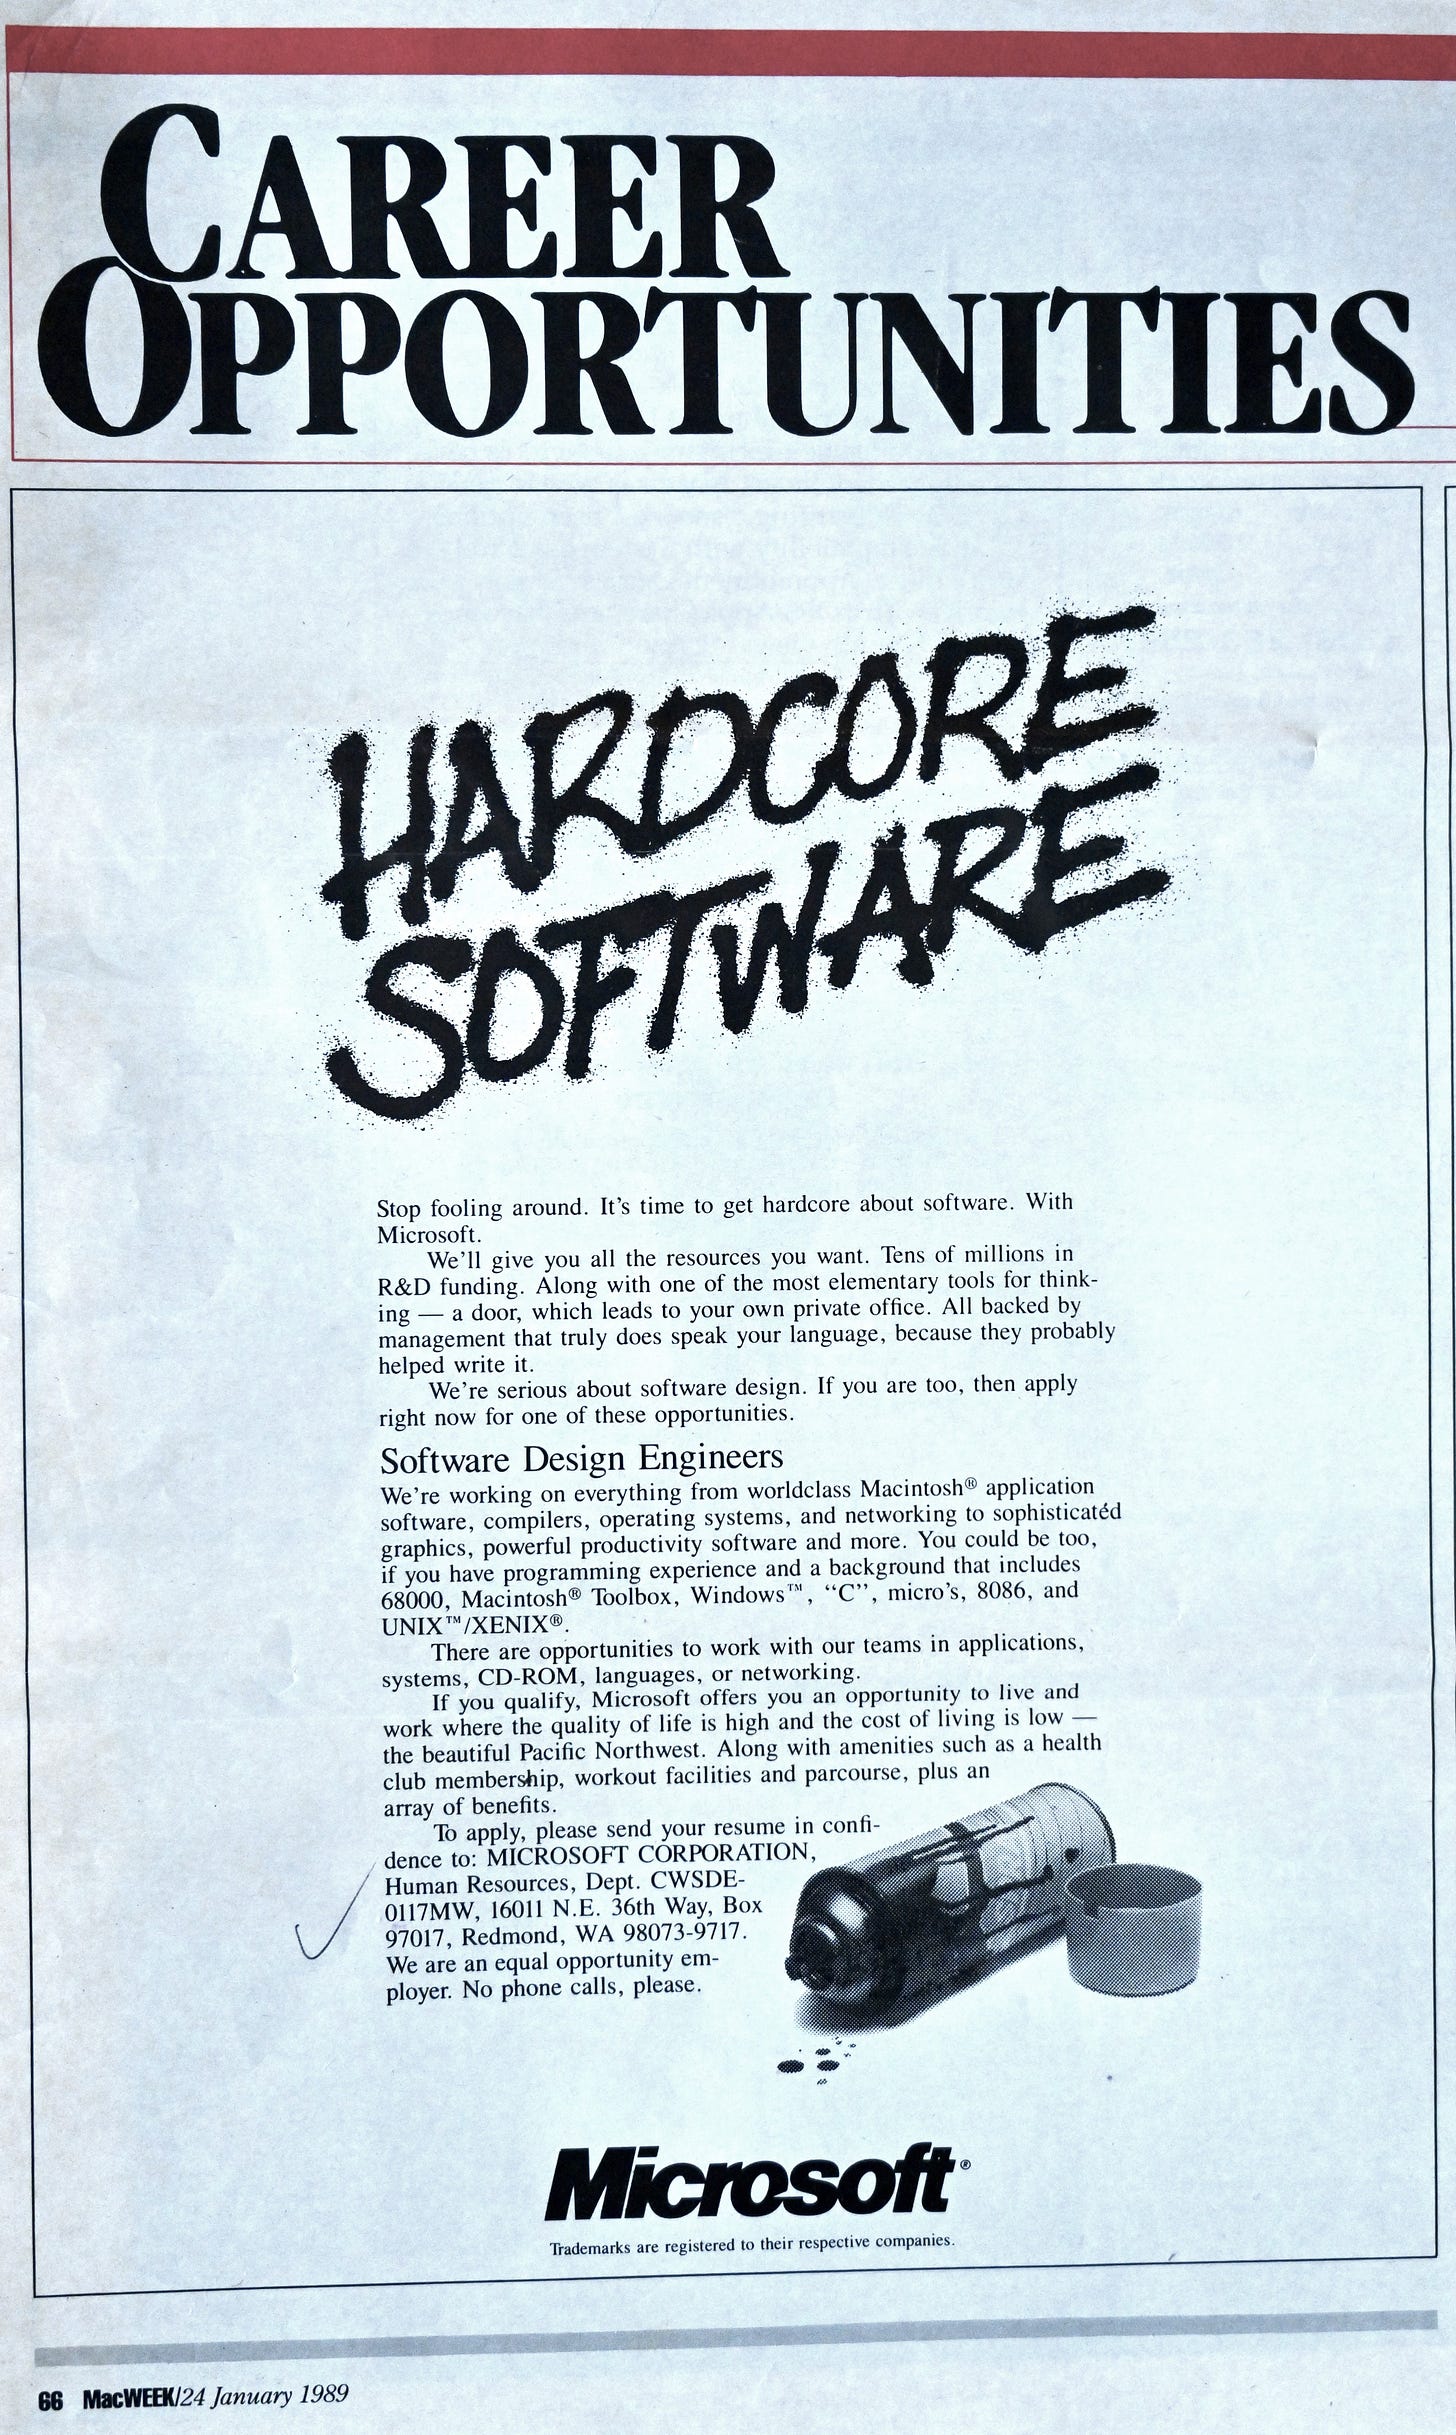 Page from magazine advertisement. Headline is "Career Opportunities"  The ad features a stylized like graffiti writing "Hardcore Software" and a description of the Software Design Engineer job.